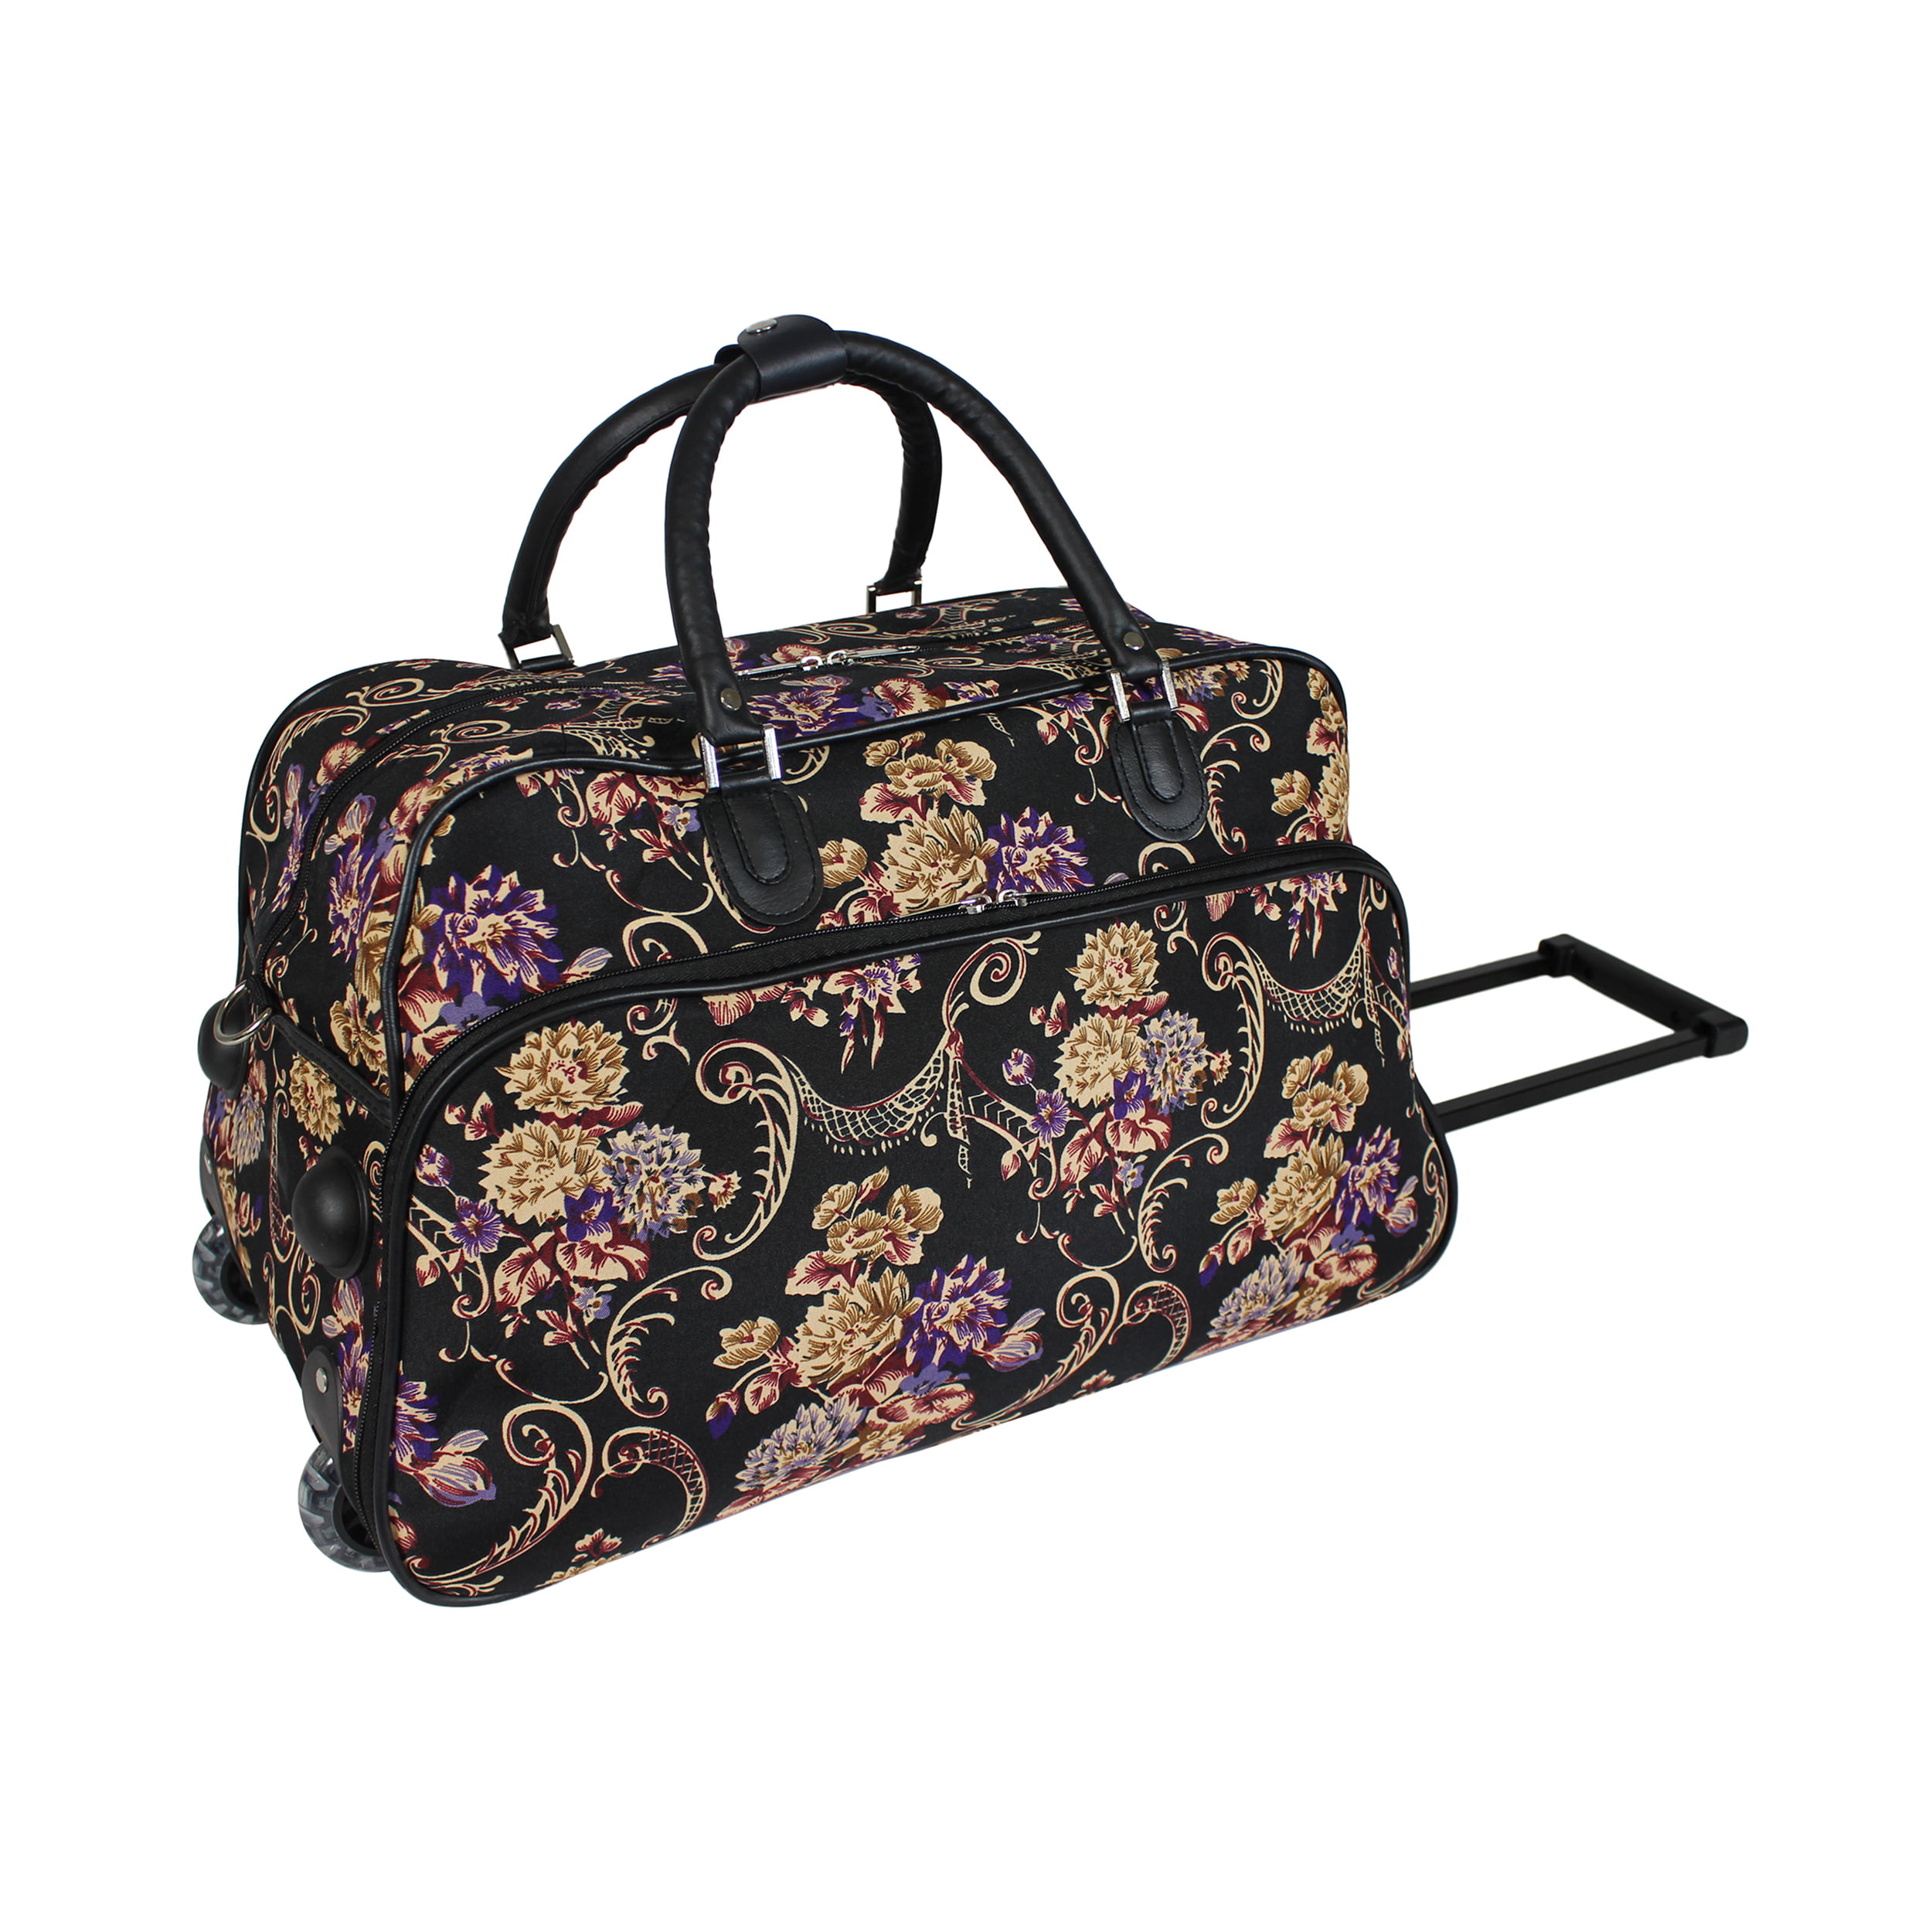 World Traveler Classic Floral 21-in. Carry-On Rolling Duffel Bag - www.semadata.org